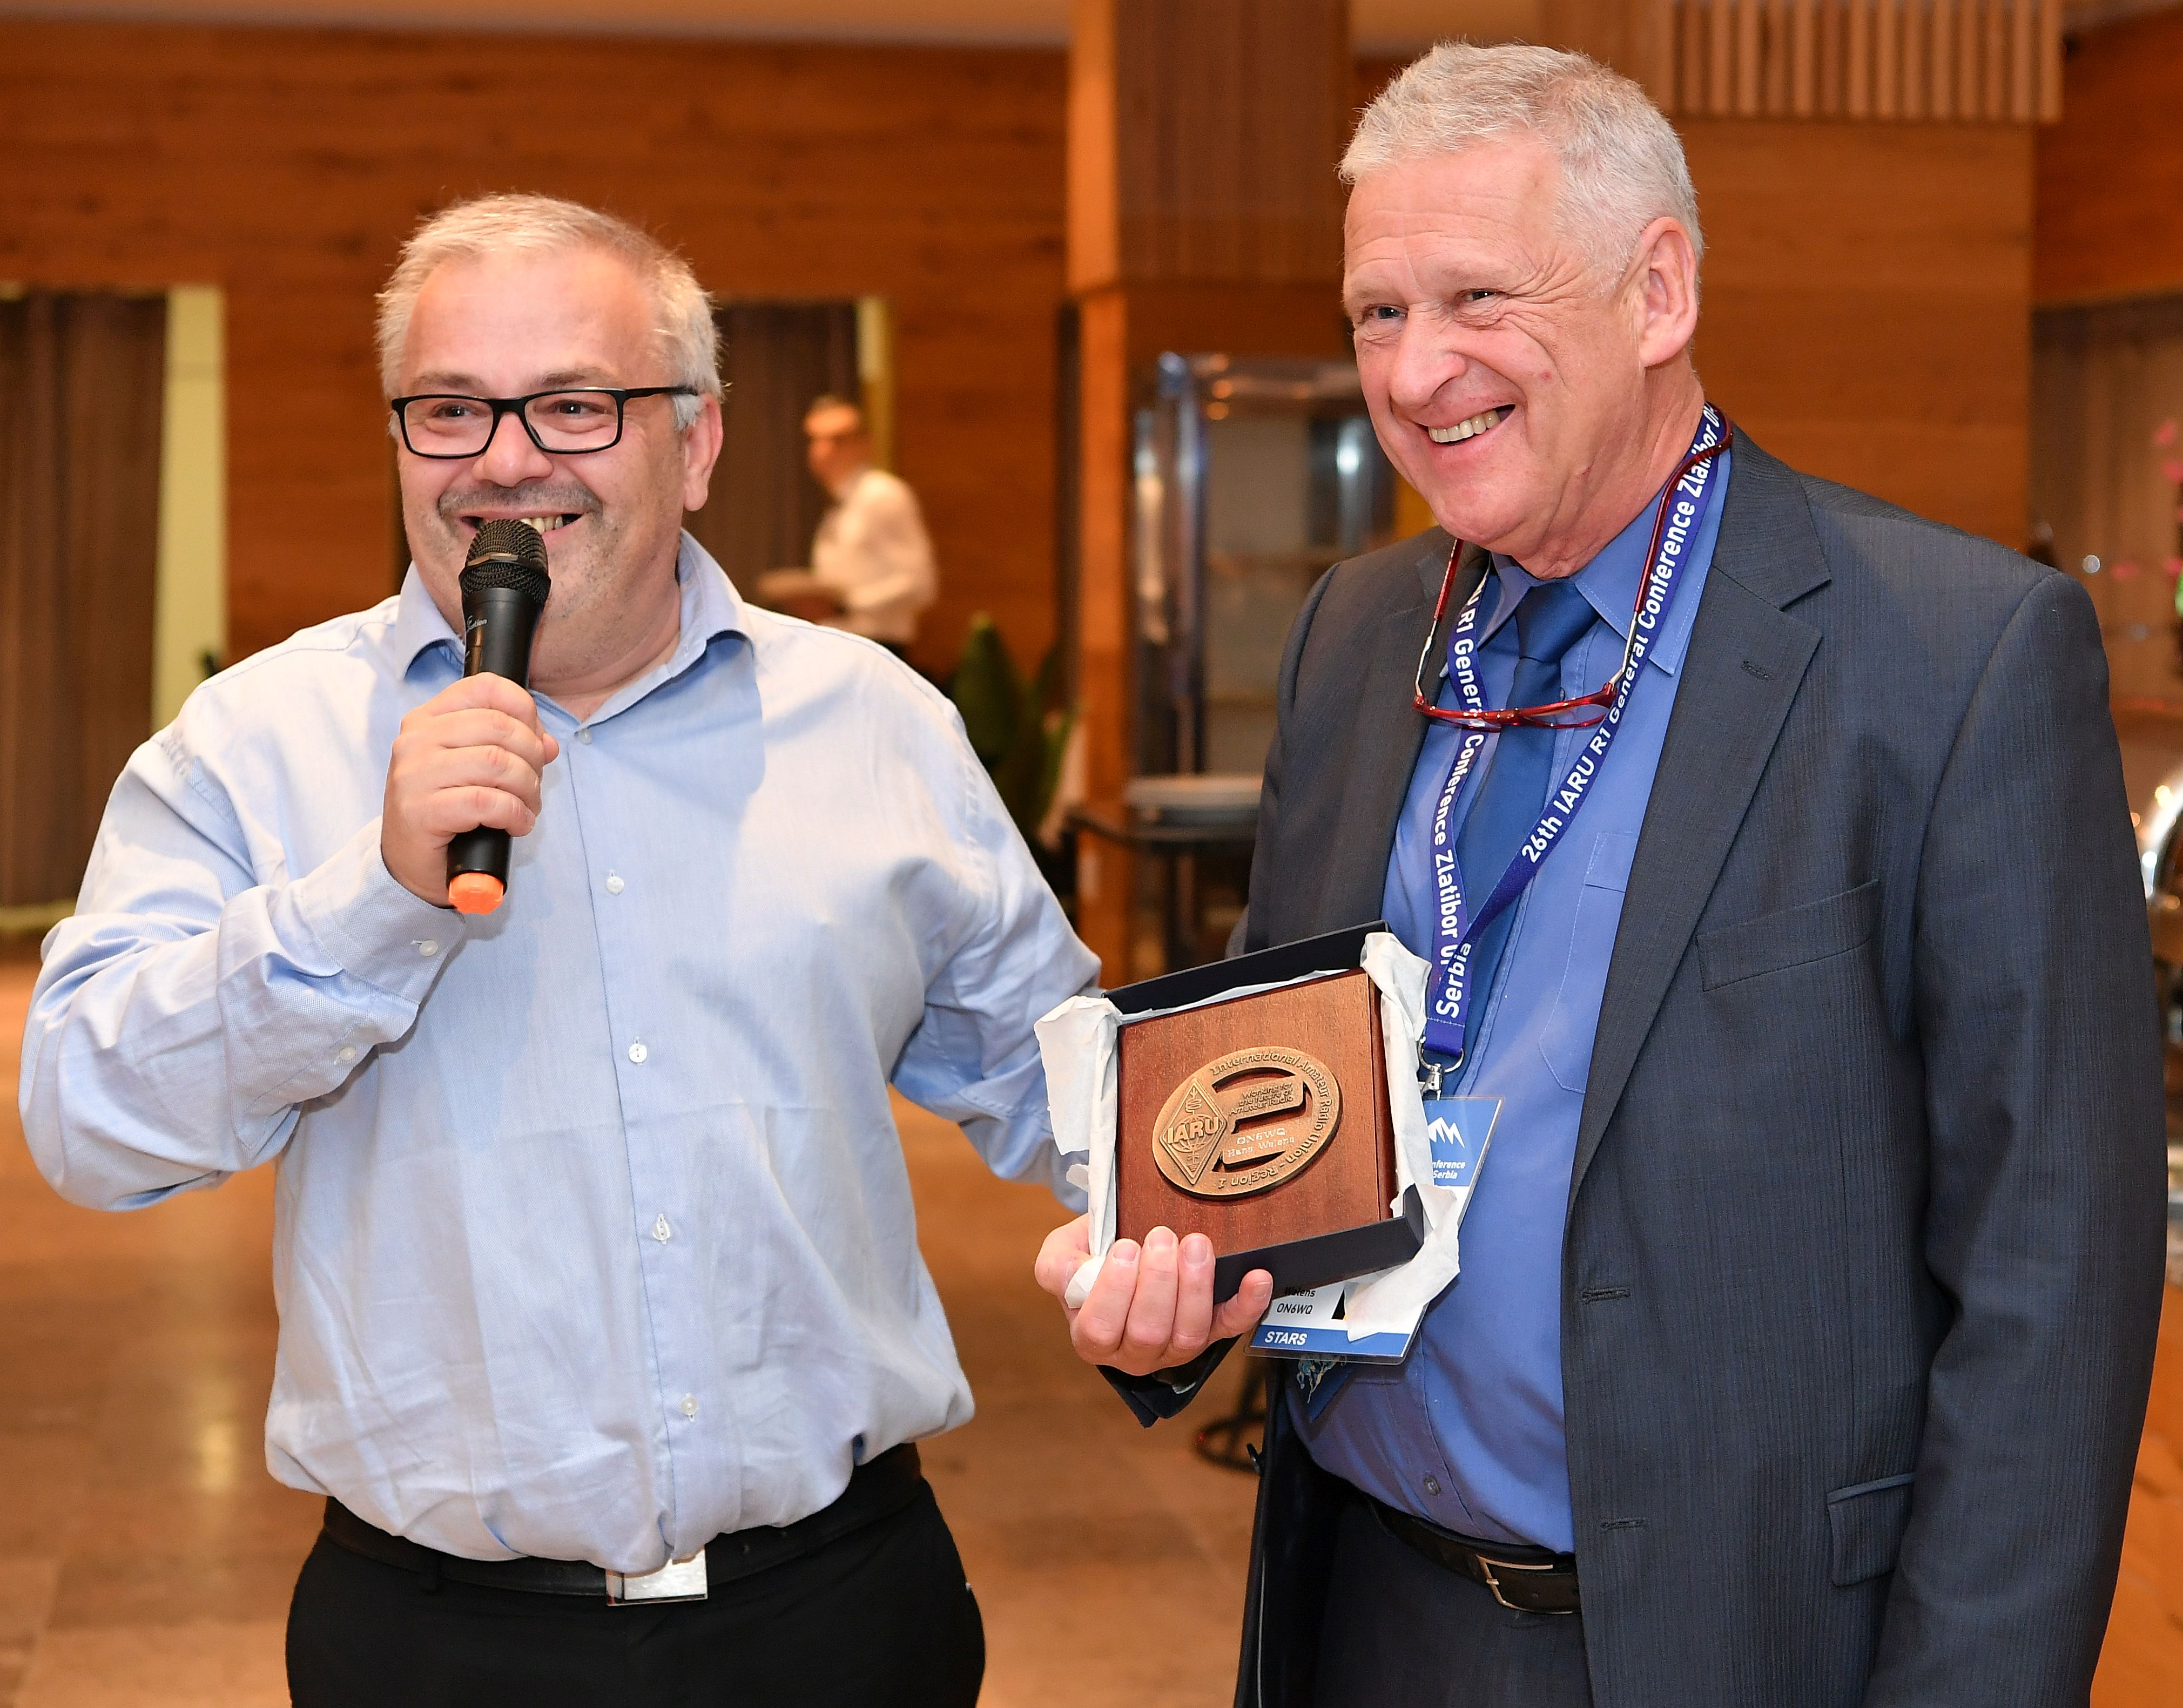 ON6WQ awarded by the IARU president at the hala dinner